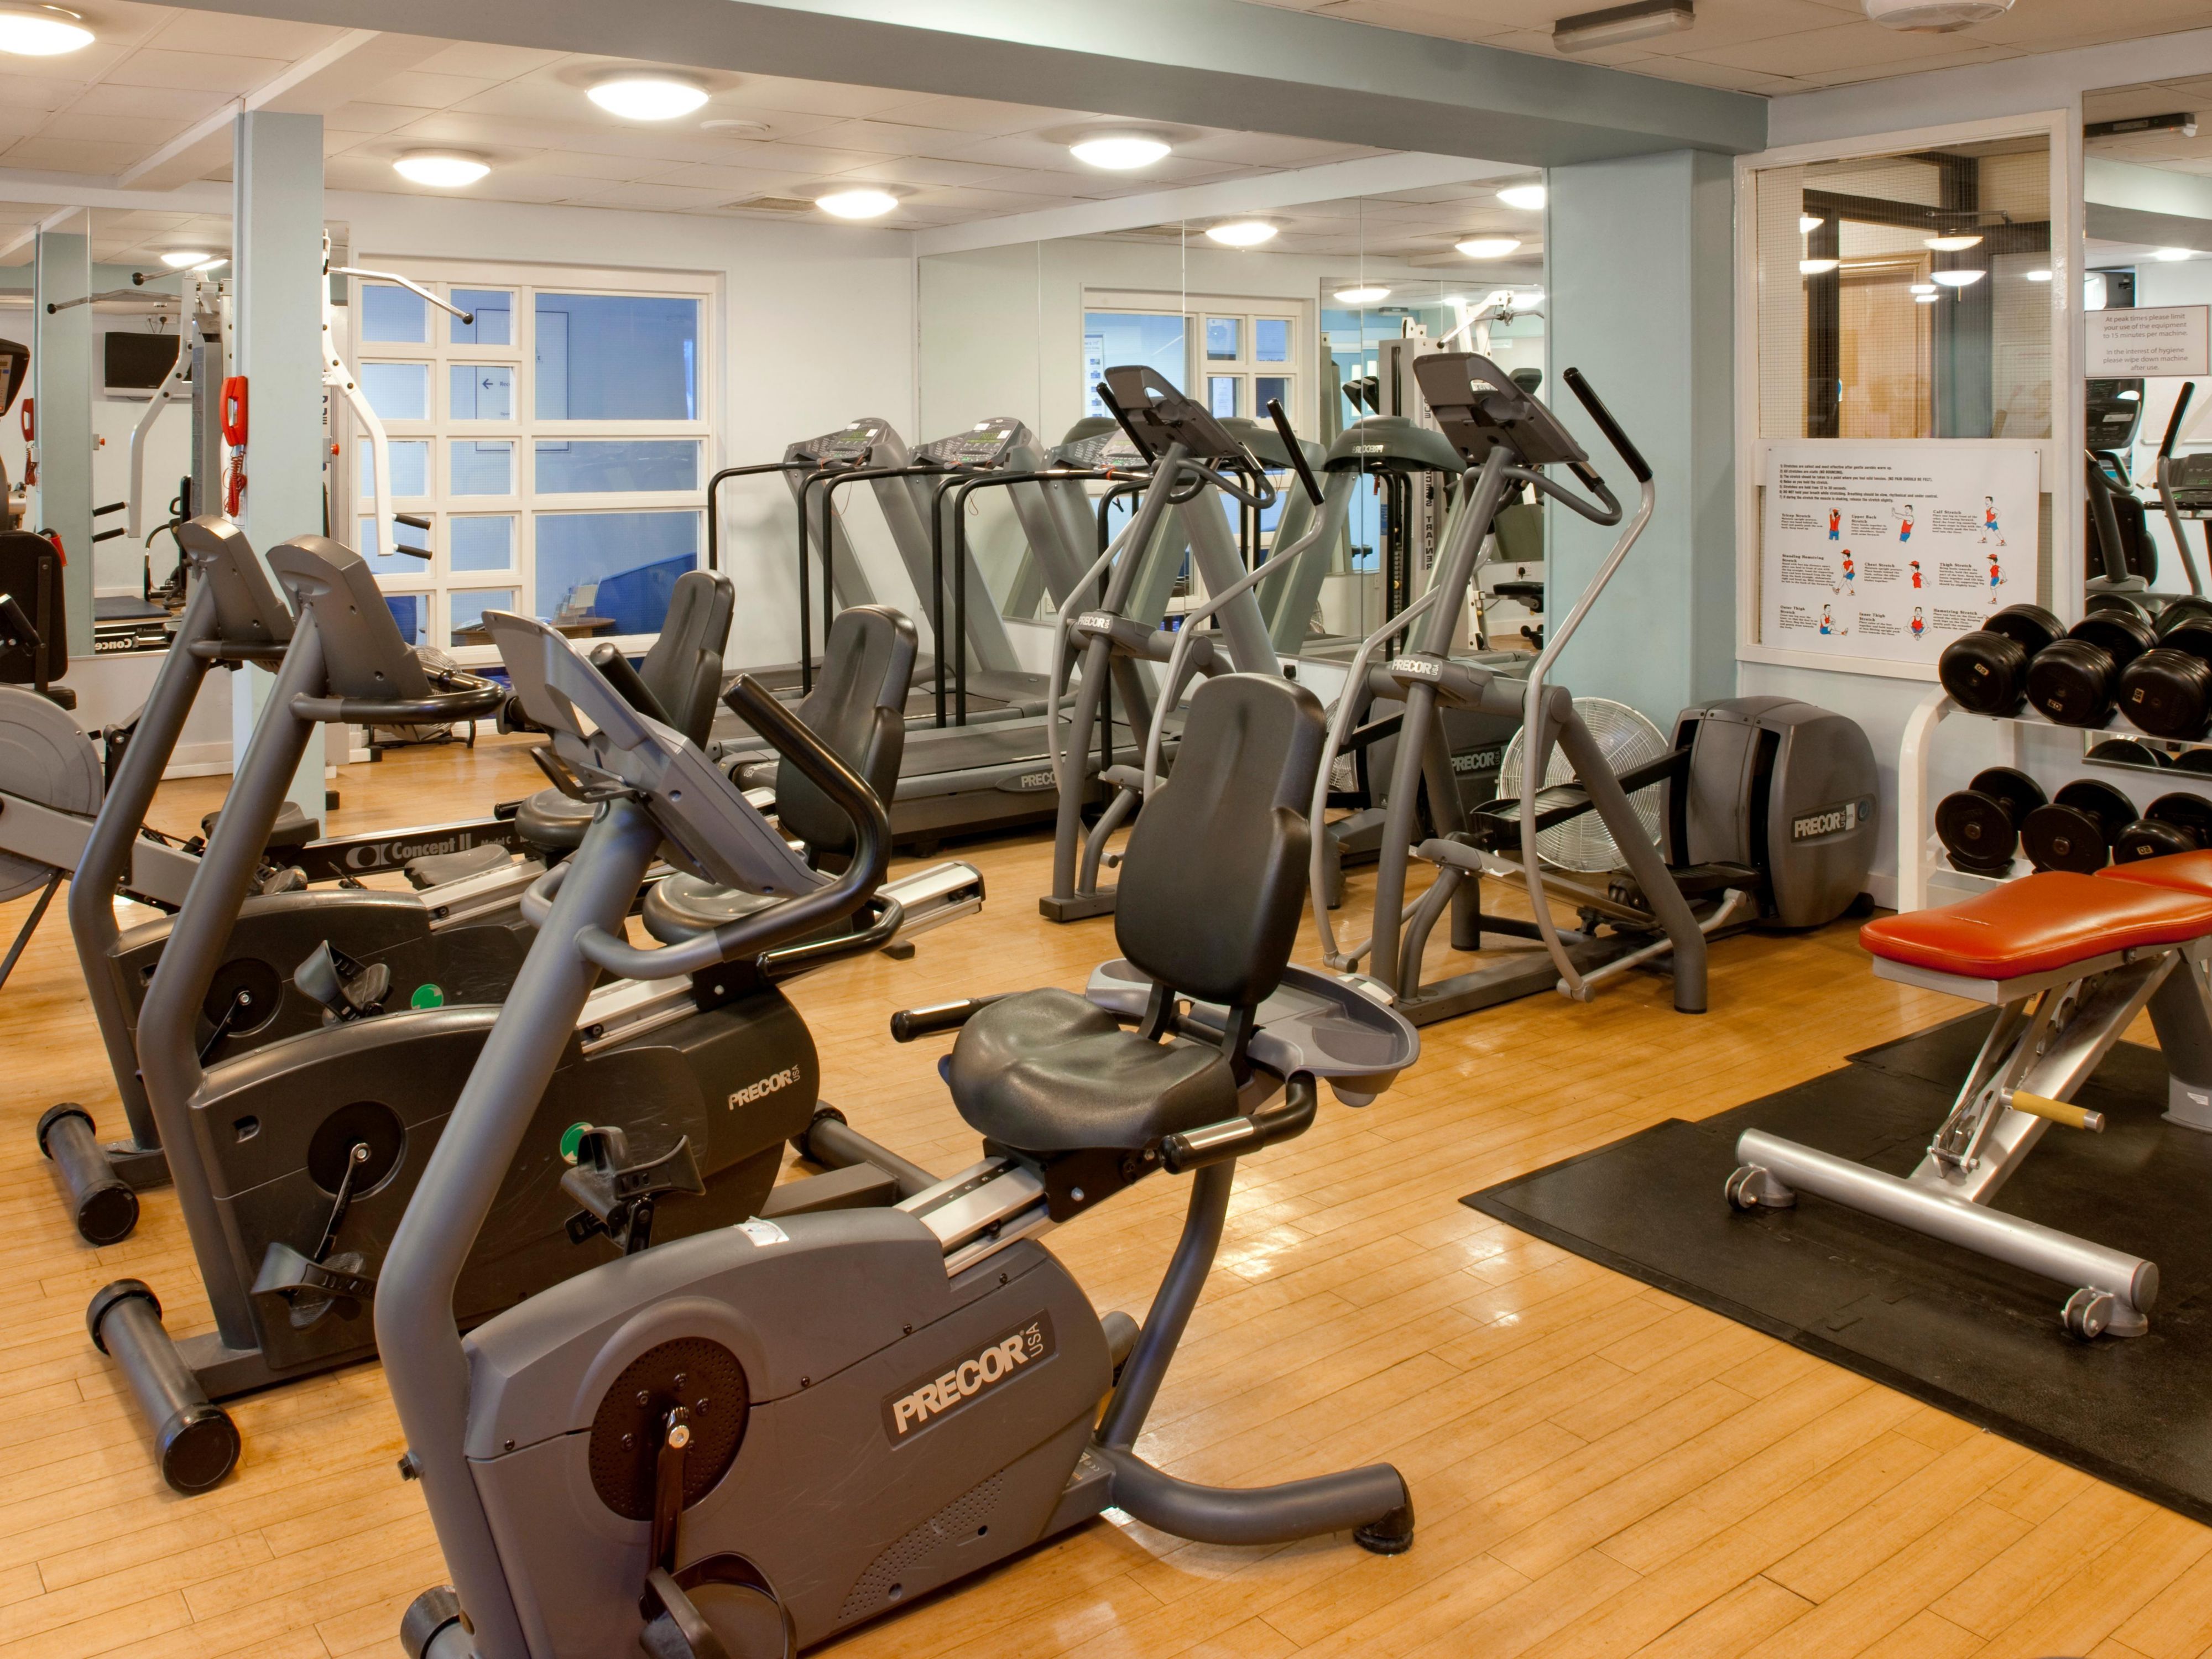 Here at You Fit Leeds - Garforth, we're fully committed to providing all our clients with the best support to help them reach their health goals.

With facilities including a swimming pool, fitness suite, fully equipped gym, studio classes, sauna and steam room.
